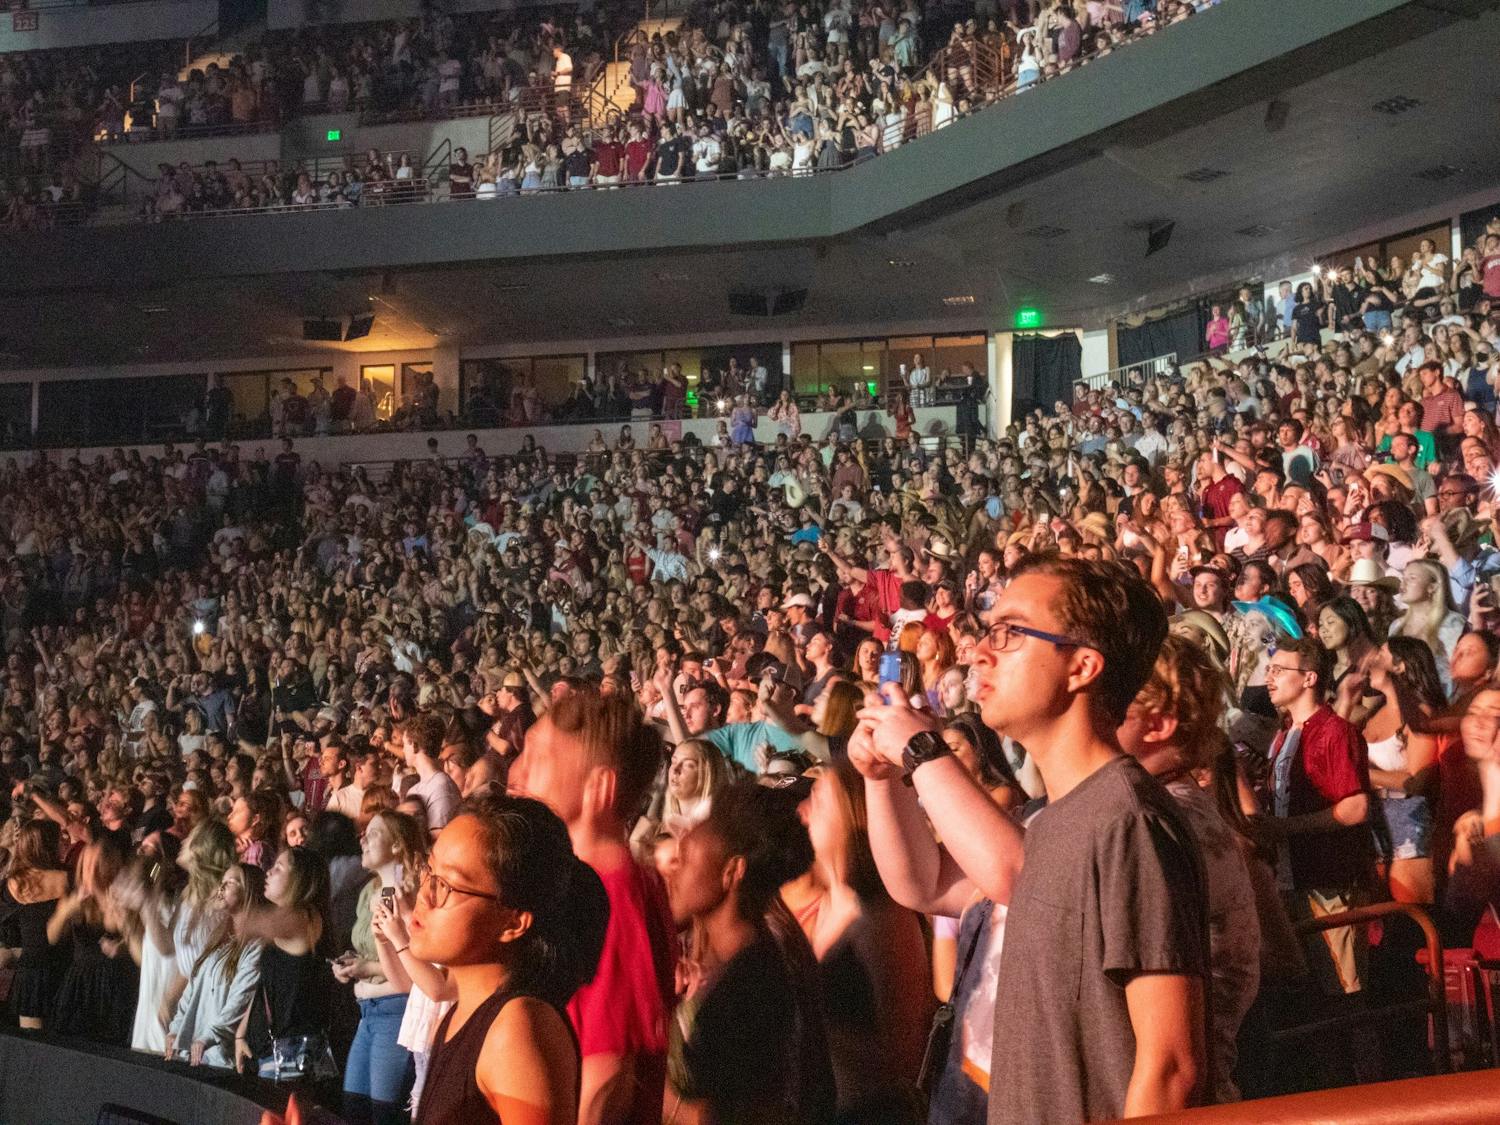 The seats of Colonial Life Arena packed with students from the University of South Carolina during the Darius Rucker Concert on April 24, 2022. The concert was held as a celebration for the women's basketball team.